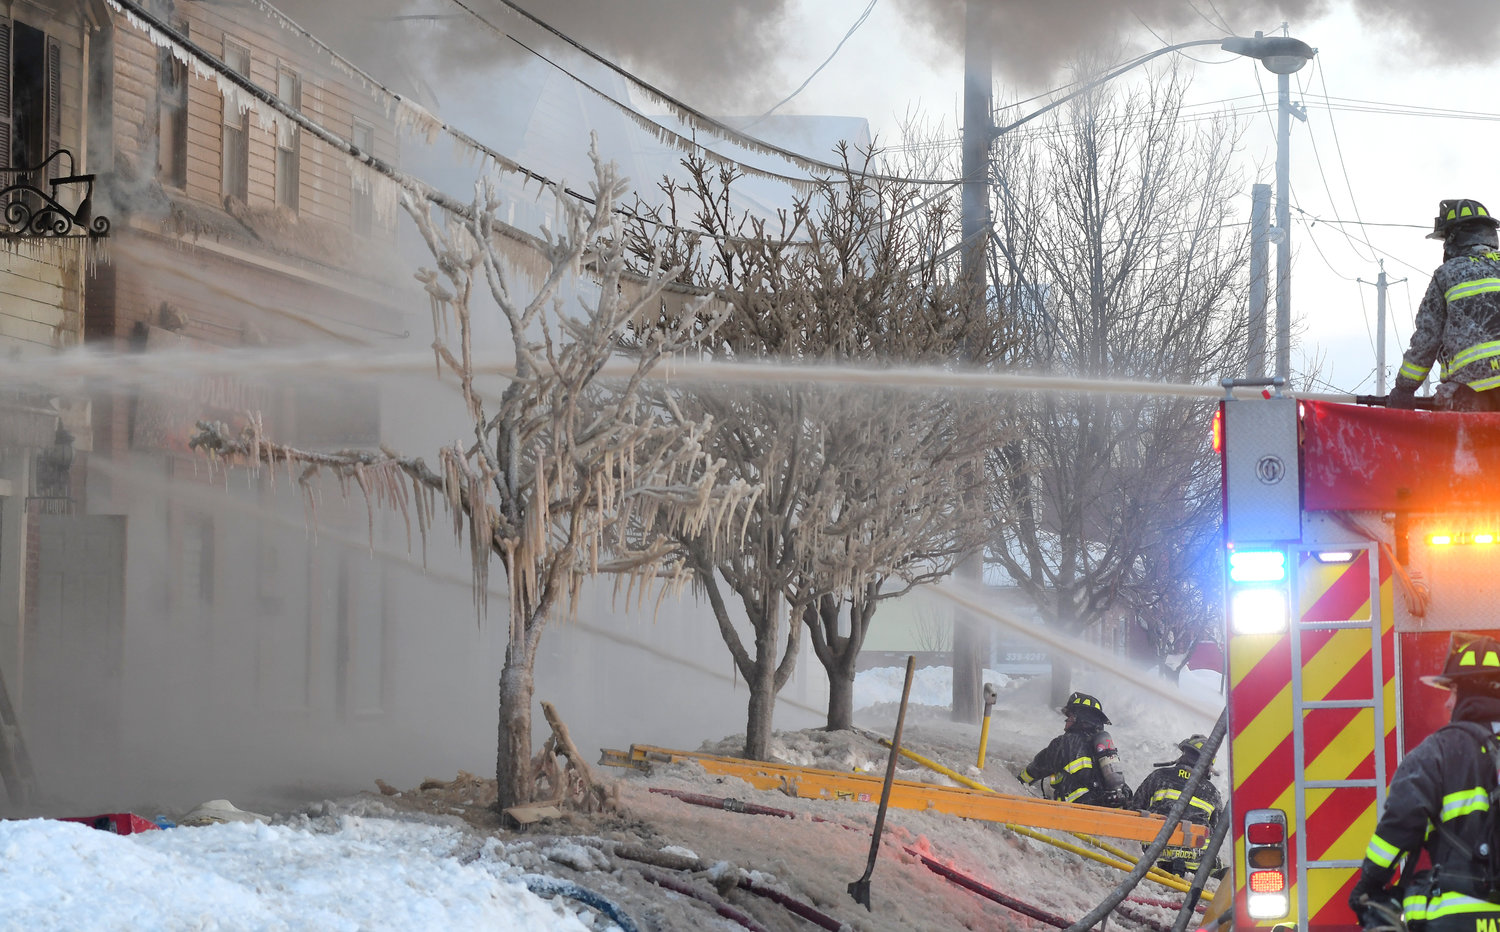 STILL WORKING — Firefighters battle the blaze at 305 N. James St. this morning, dousing flames as icycles hang from trees in front of the building and smoke billows into the morning sky.